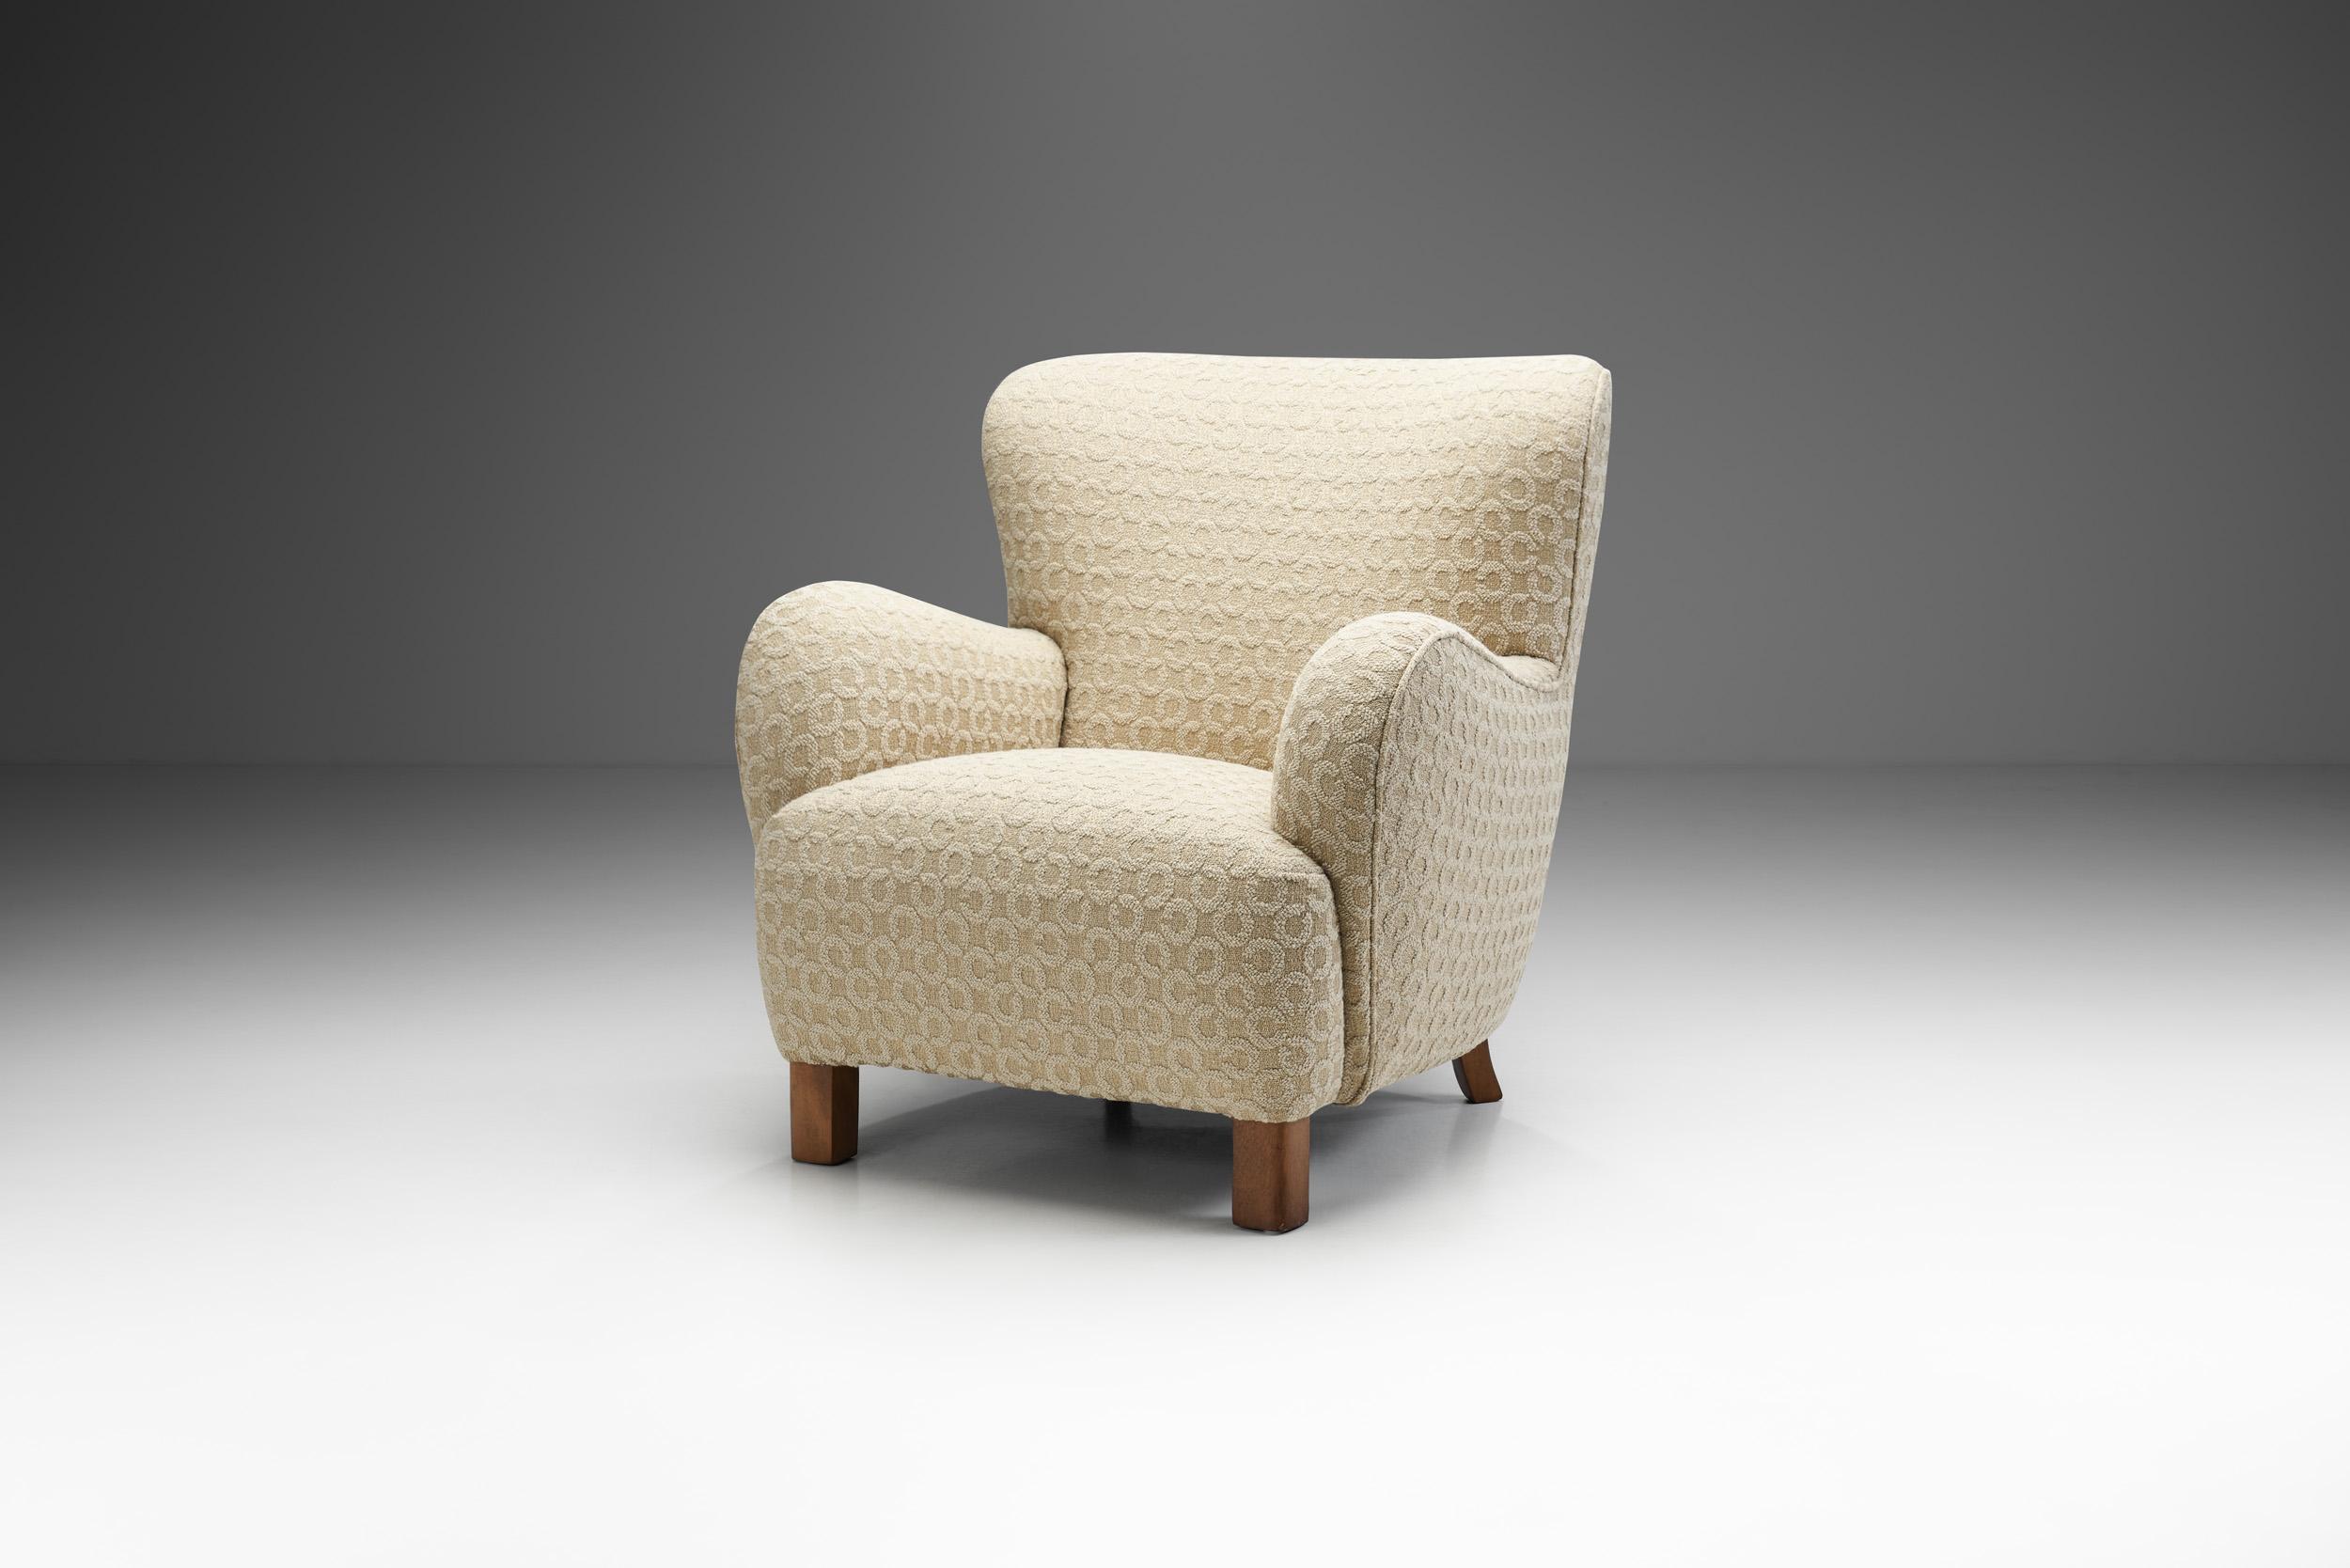 This armchair is an elegant and comfortable evidence of the mastery and artistry of the Danish cabinetmakers who defined mid-20th century modern seating. This model is of the highest quality, both in terms of visuals, materials, and craftsmanship.